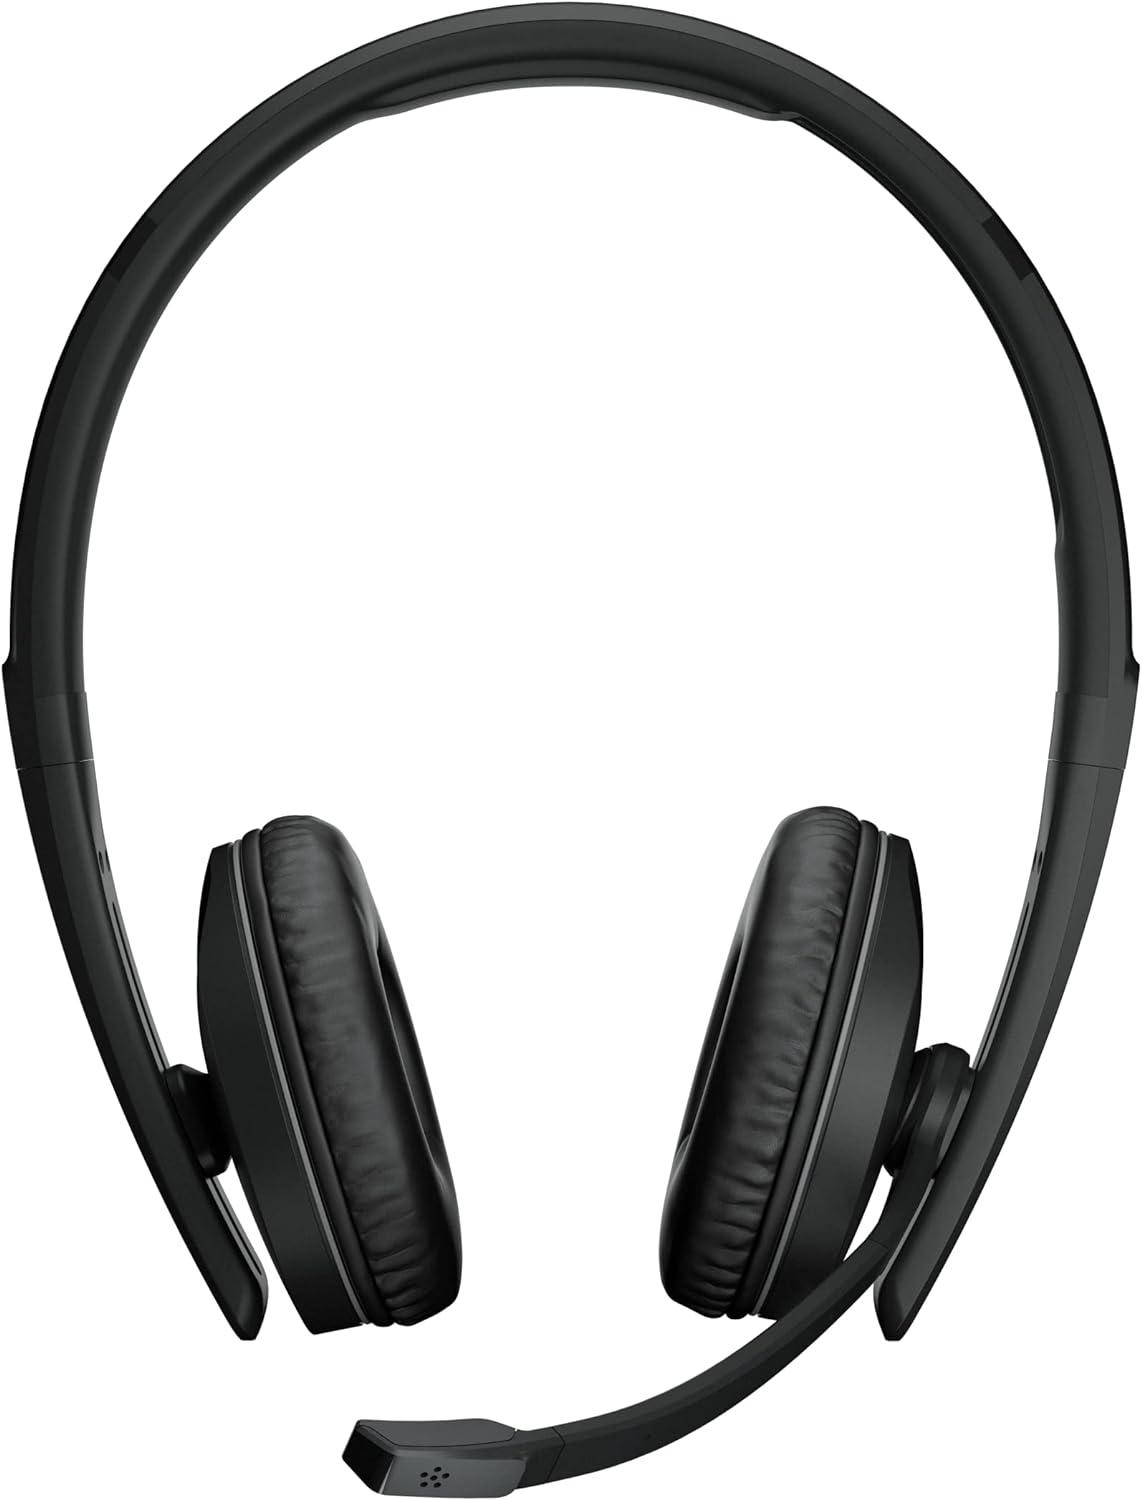 epos sennheiser c20 bluetooth headset with microphone wireless headphones with up to 27 hours battery life